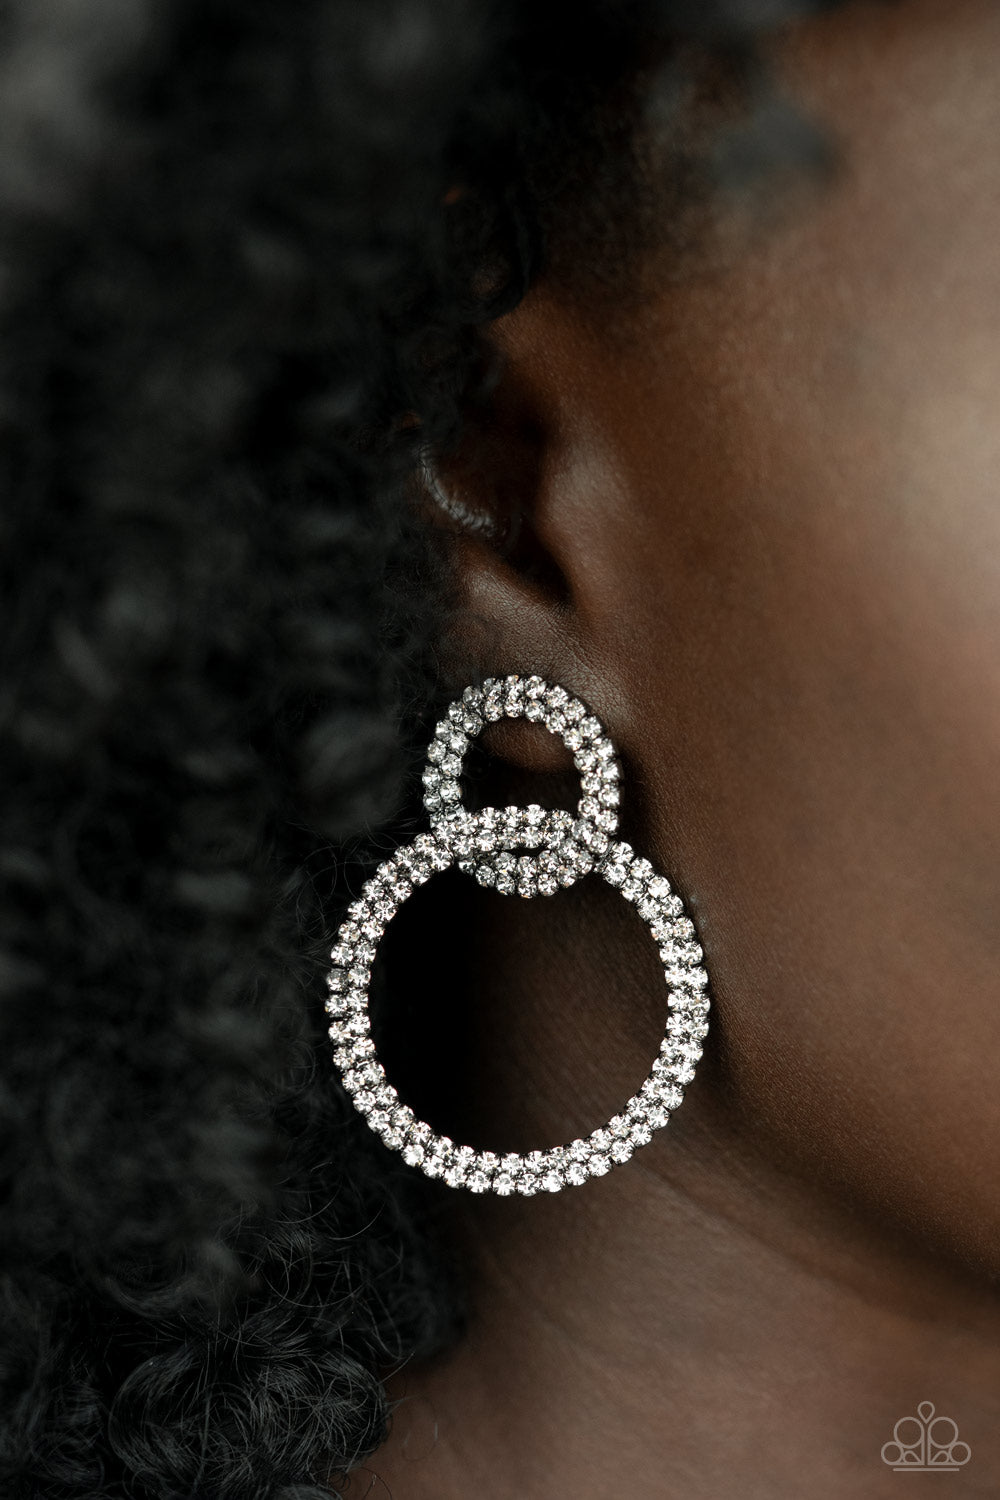 Intensely Icy - Black Earrings - Paparazzi Accessories - Paparazzi Accessories 